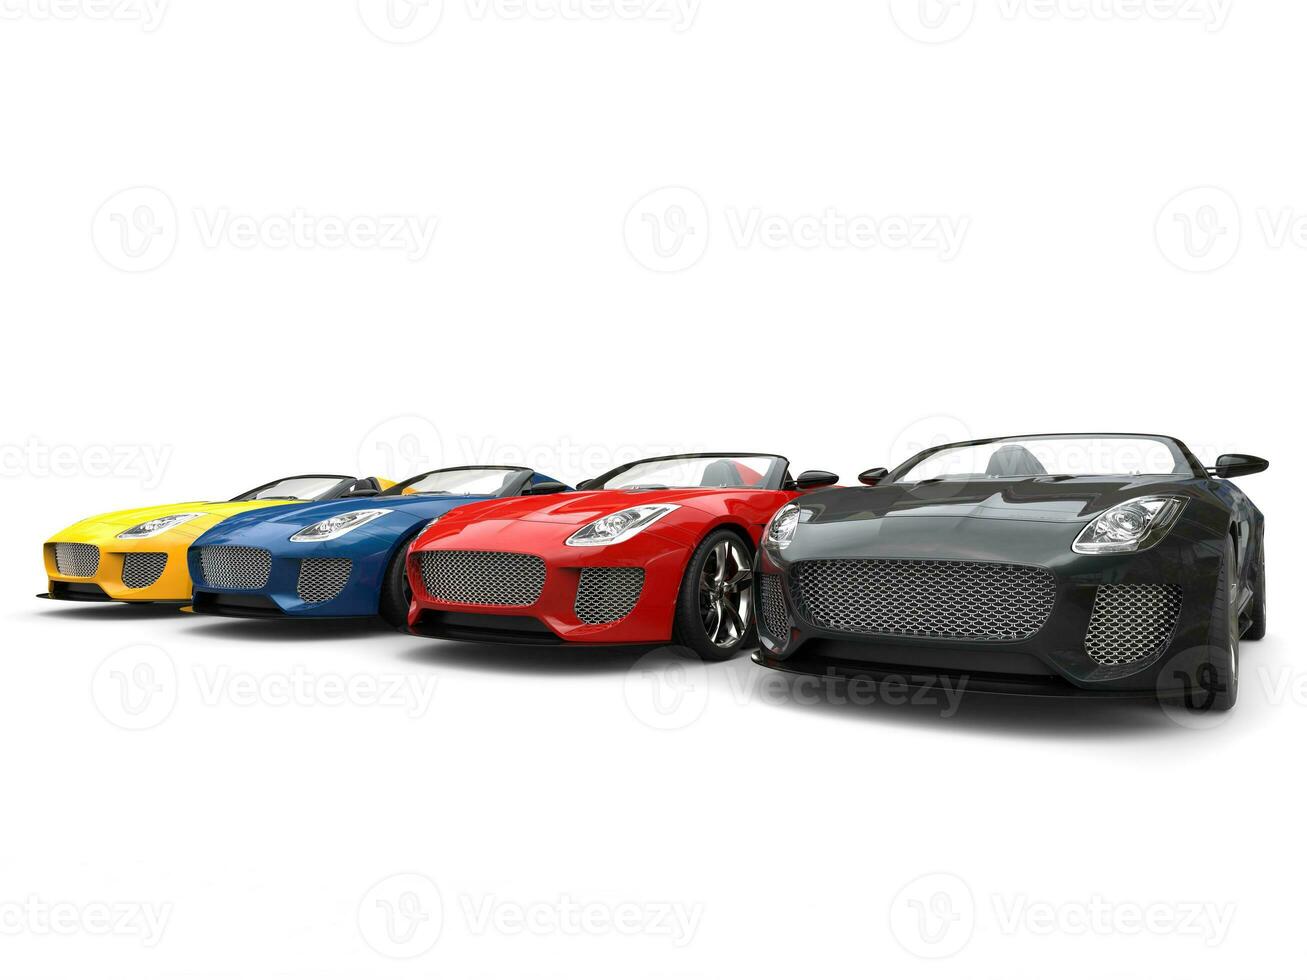 Amazing sports cars in multiple colors photo